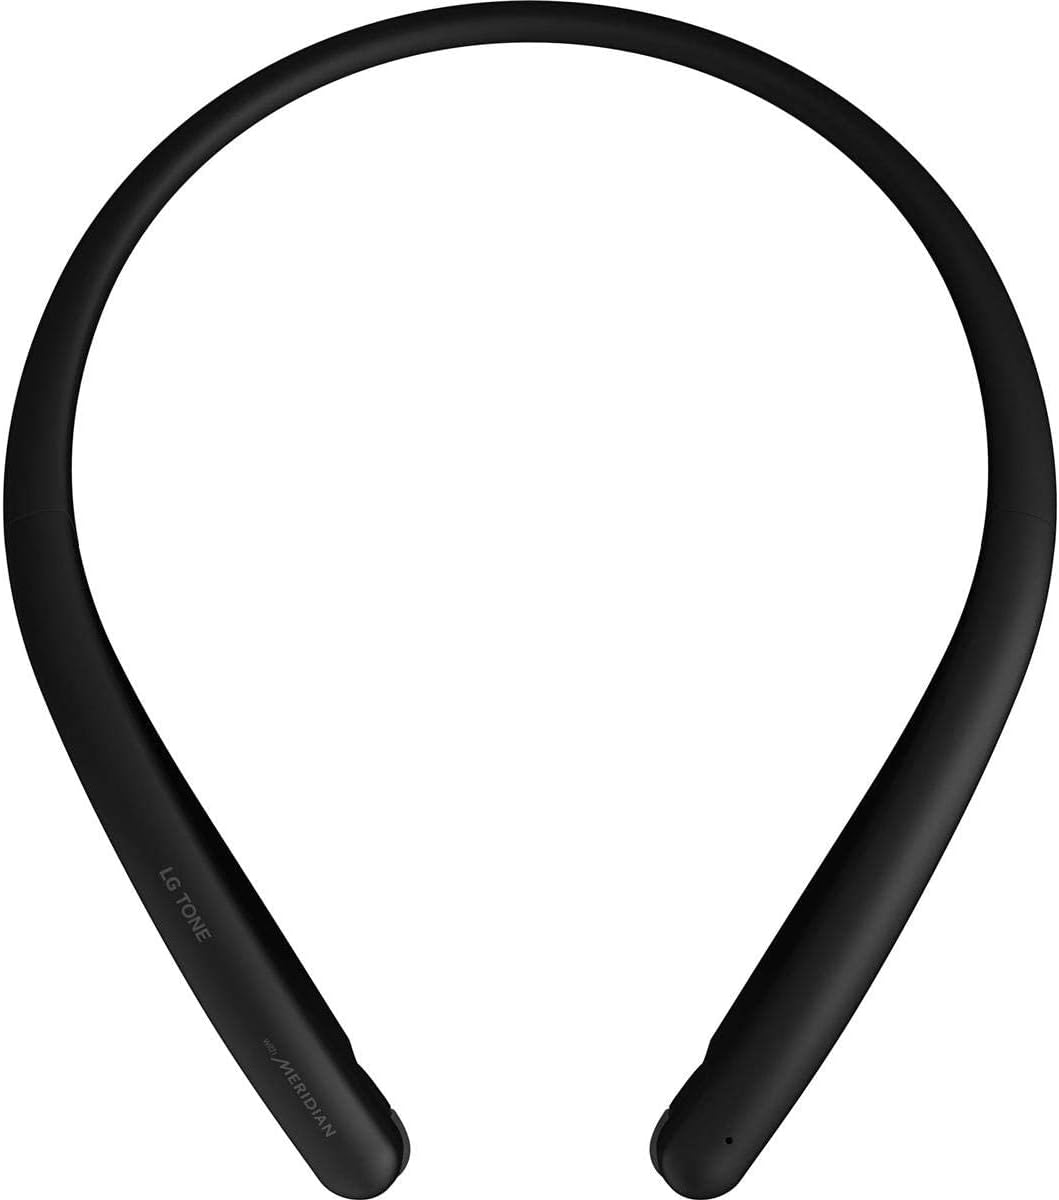 wireless earbuds with neckbands